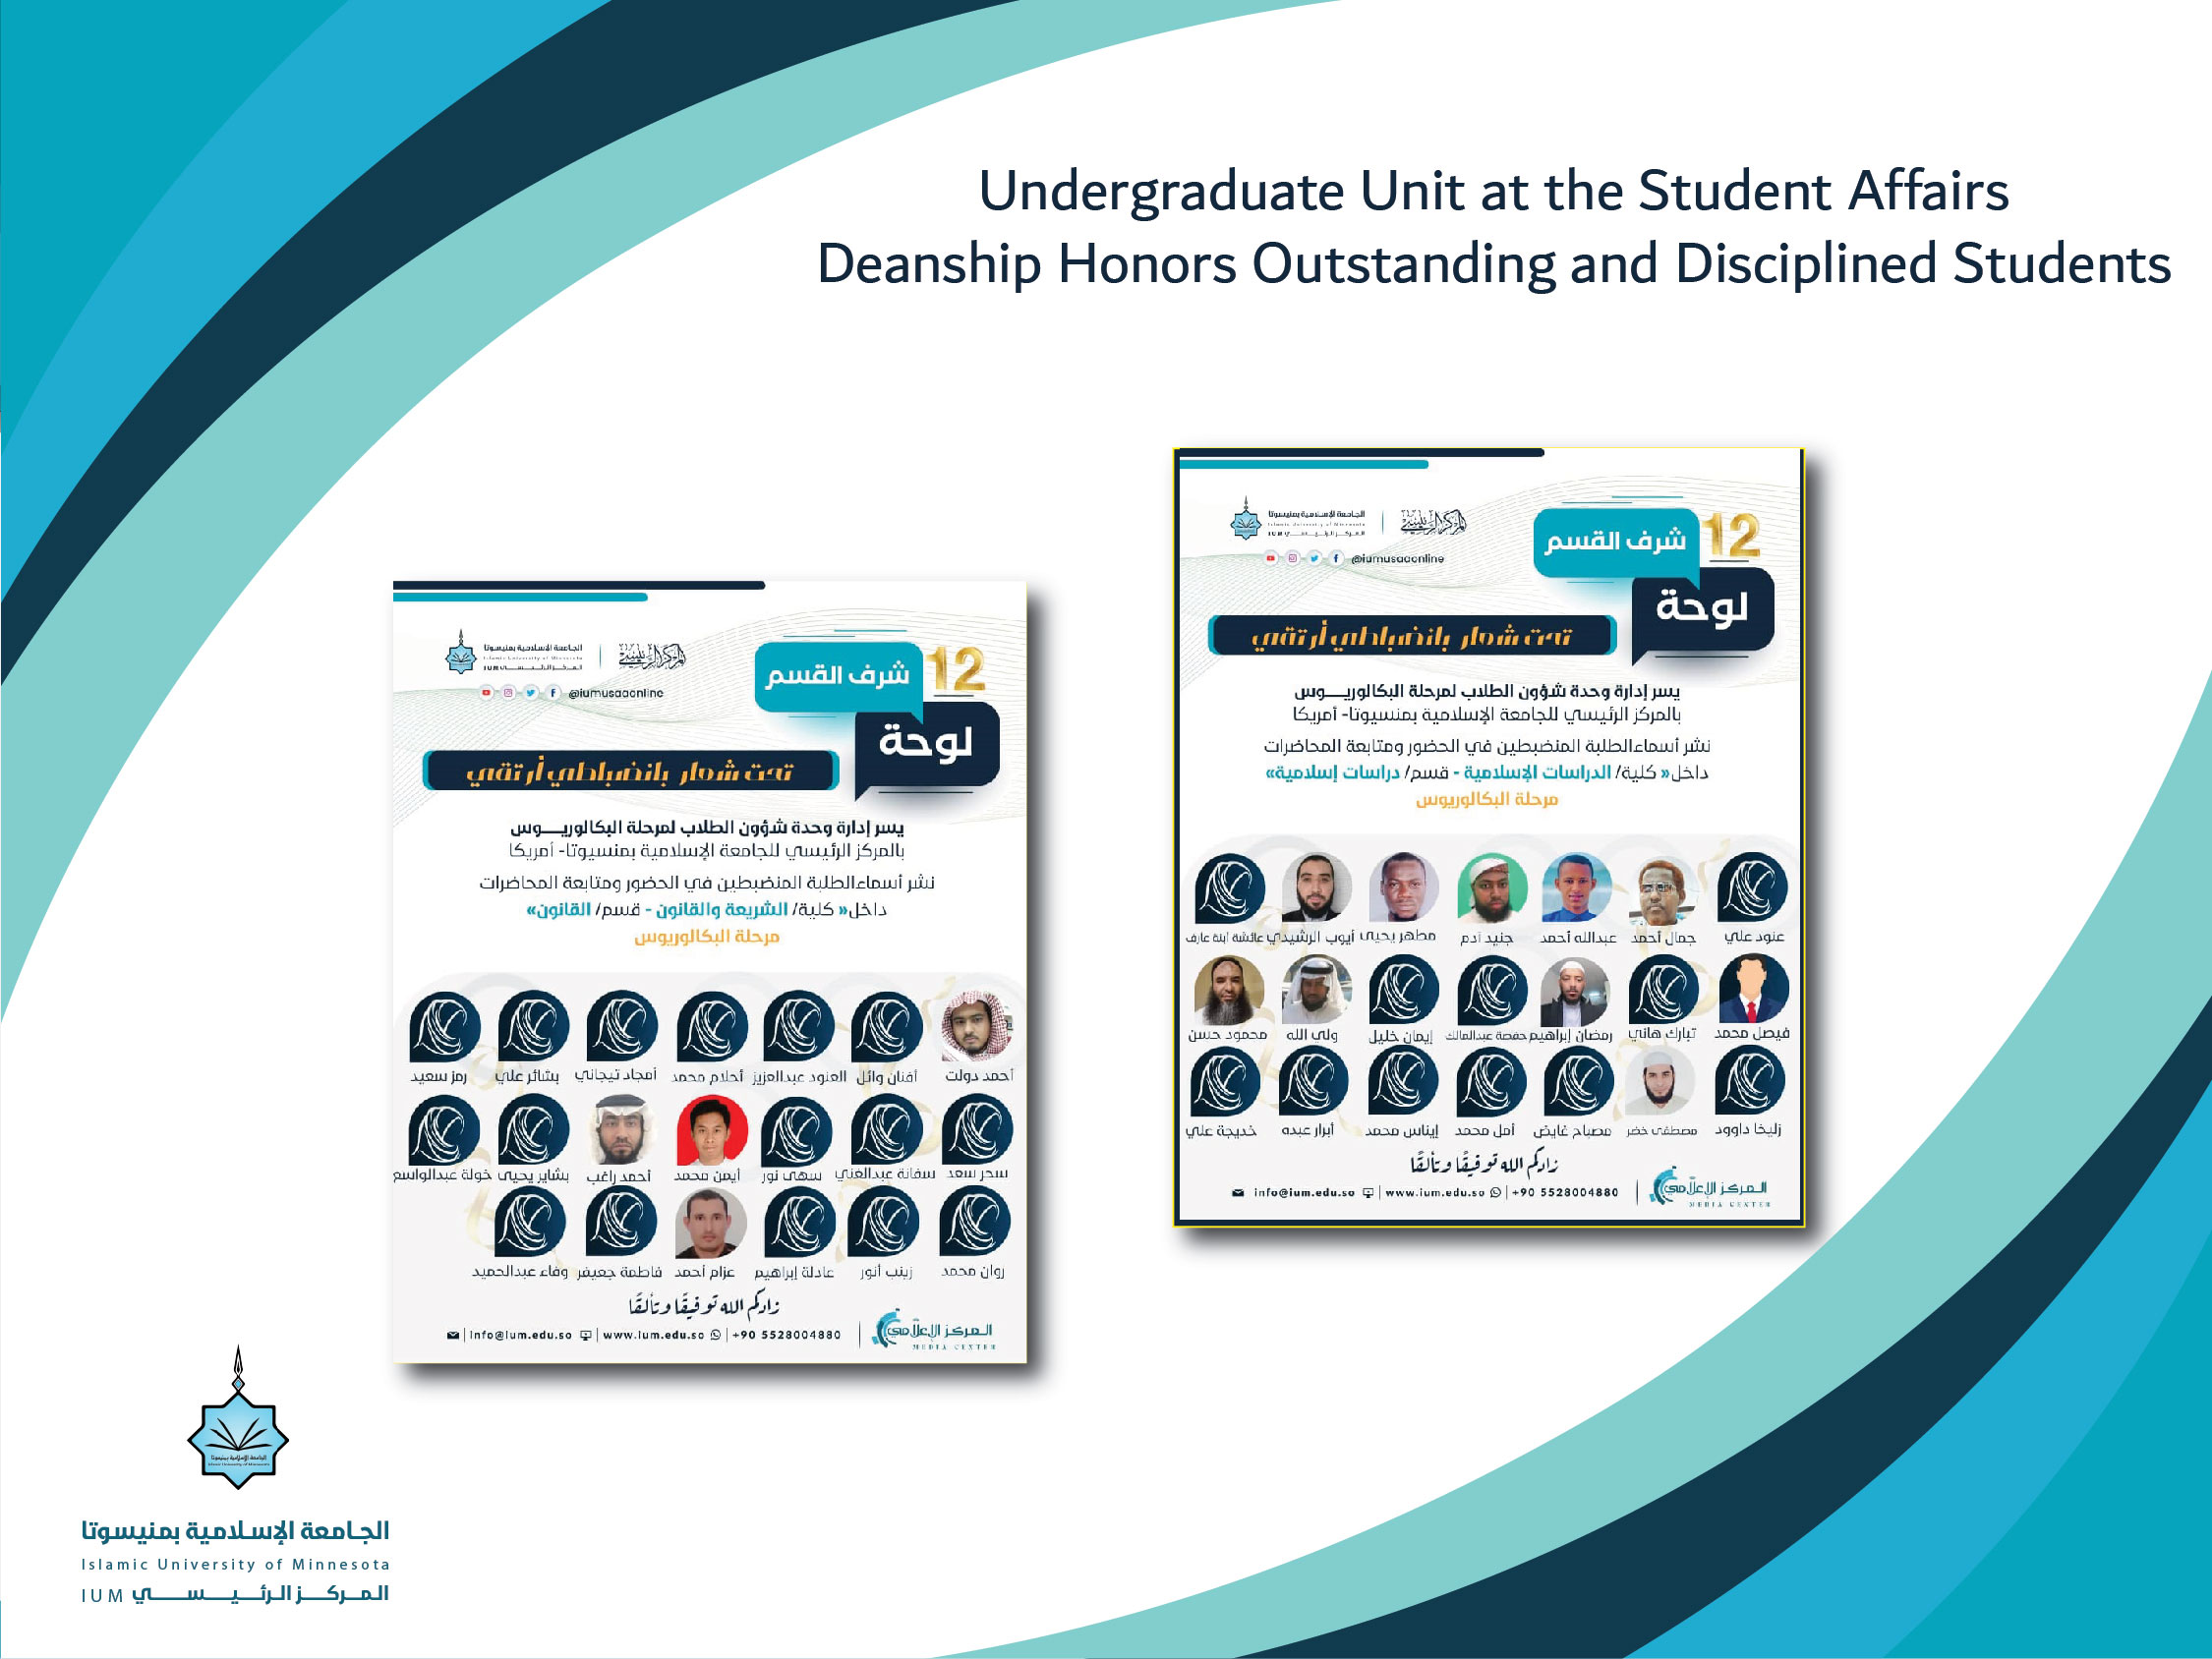 Undergraduate Unit at the Student Affairs Deanship Honors Outstanding and Disciplined Students